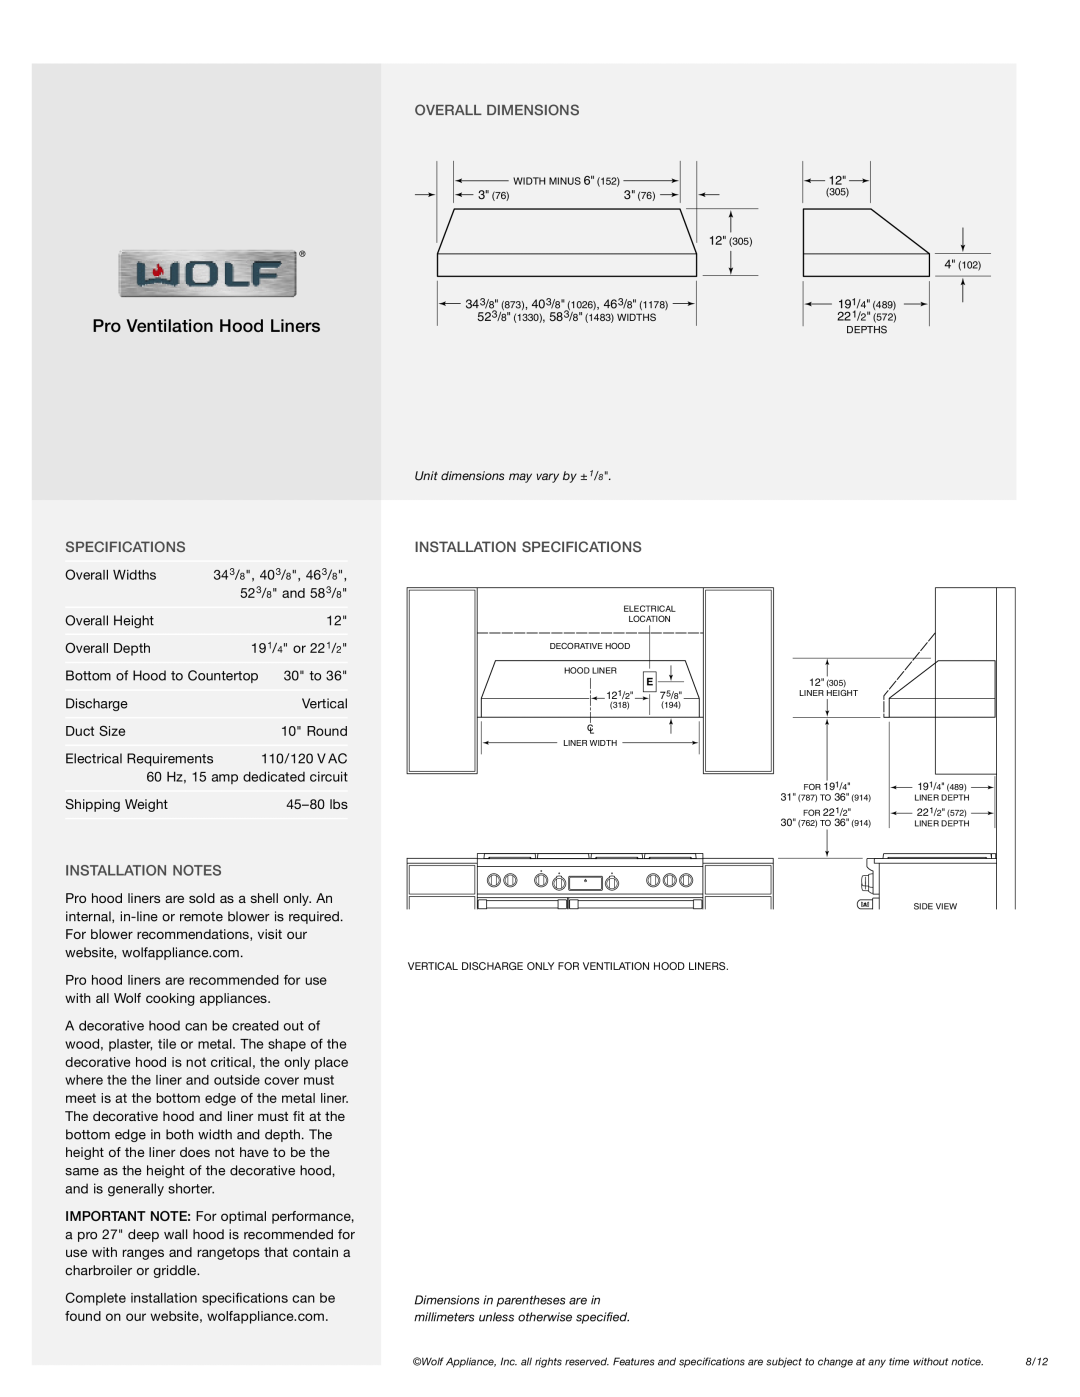 Wolf Appliance Company PL461912, PL522212, PL582212 Overall Dimensions, Installation Notes, Installation Specifications 